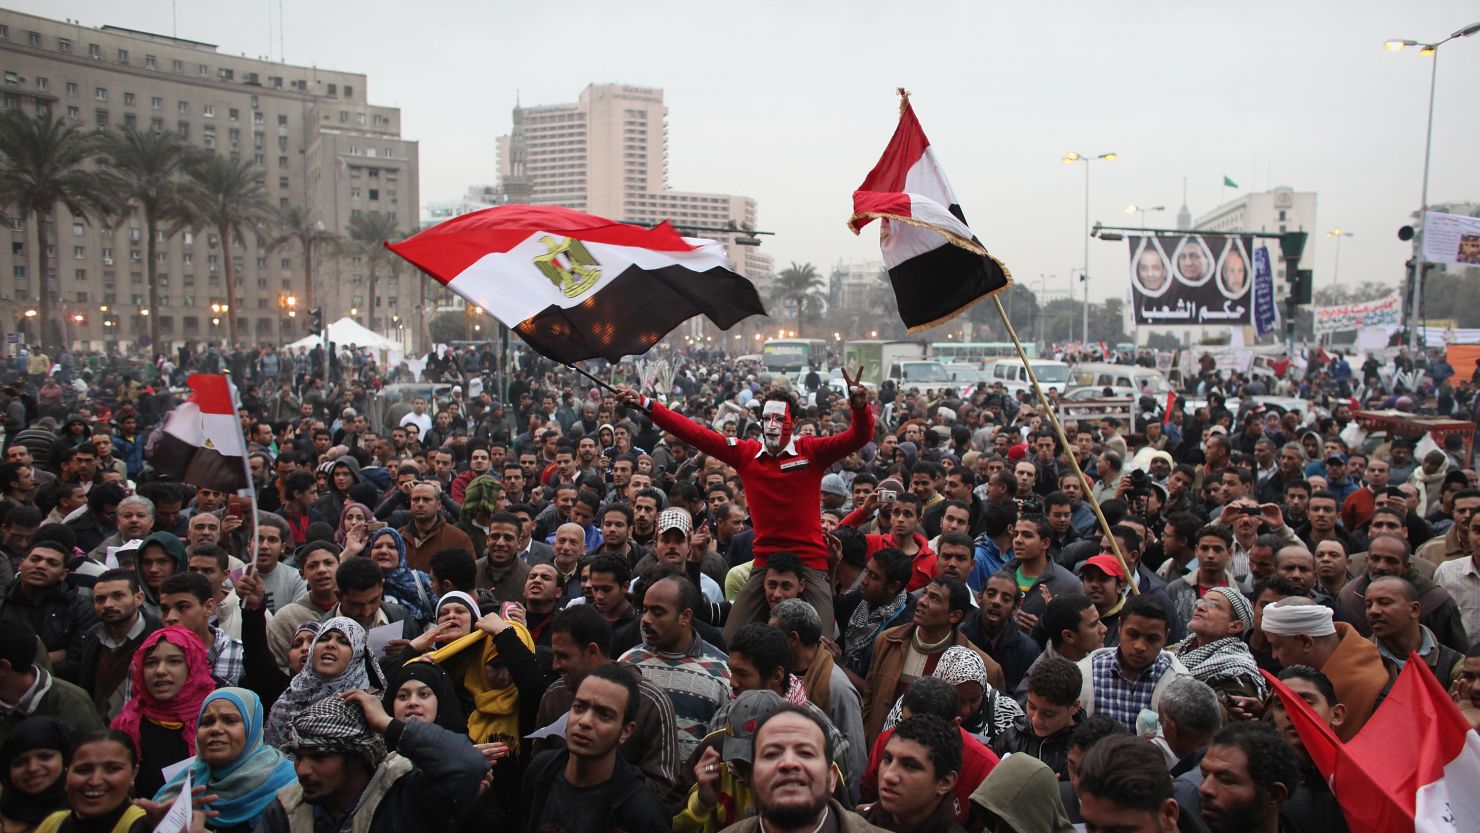 People gather in Tahir Square  for the first anniversary of the Egyptian revolution January 25. Tens of thousands are expected.